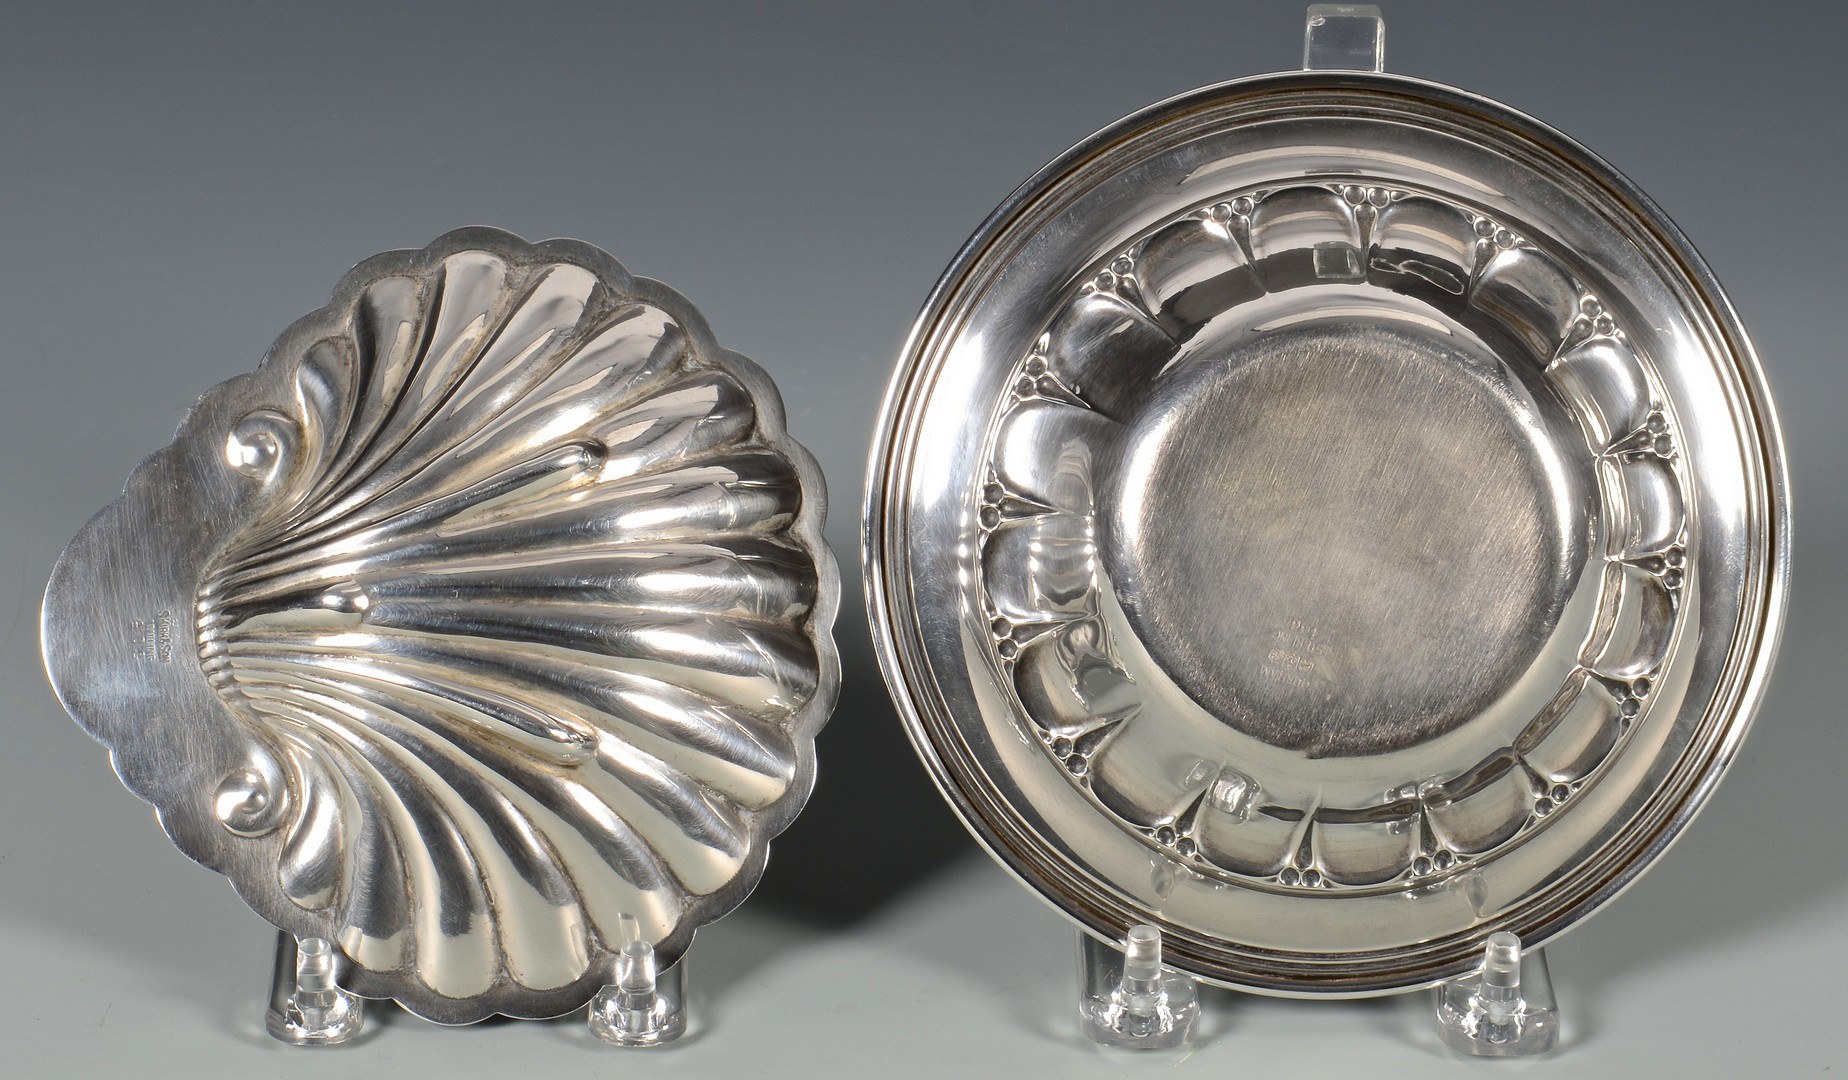 Lot 810: 5 Sterling Silver Table Items